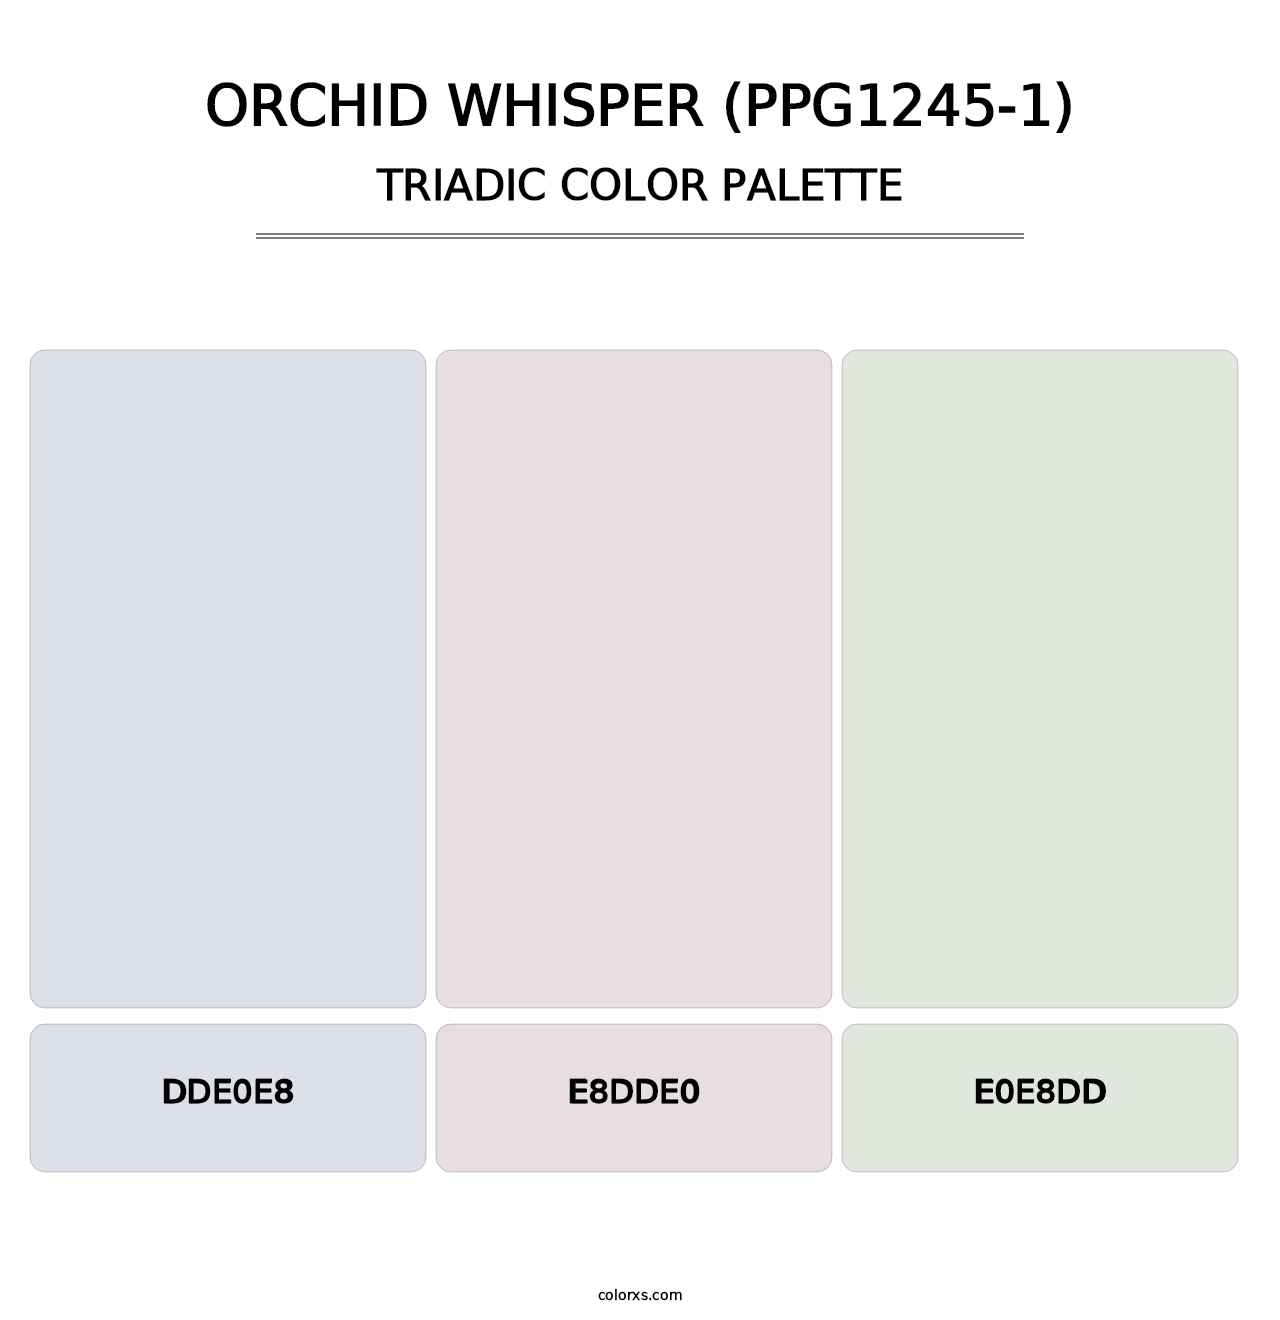 Orchid Whisper (PPG1245-1) - Triadic Color Palette